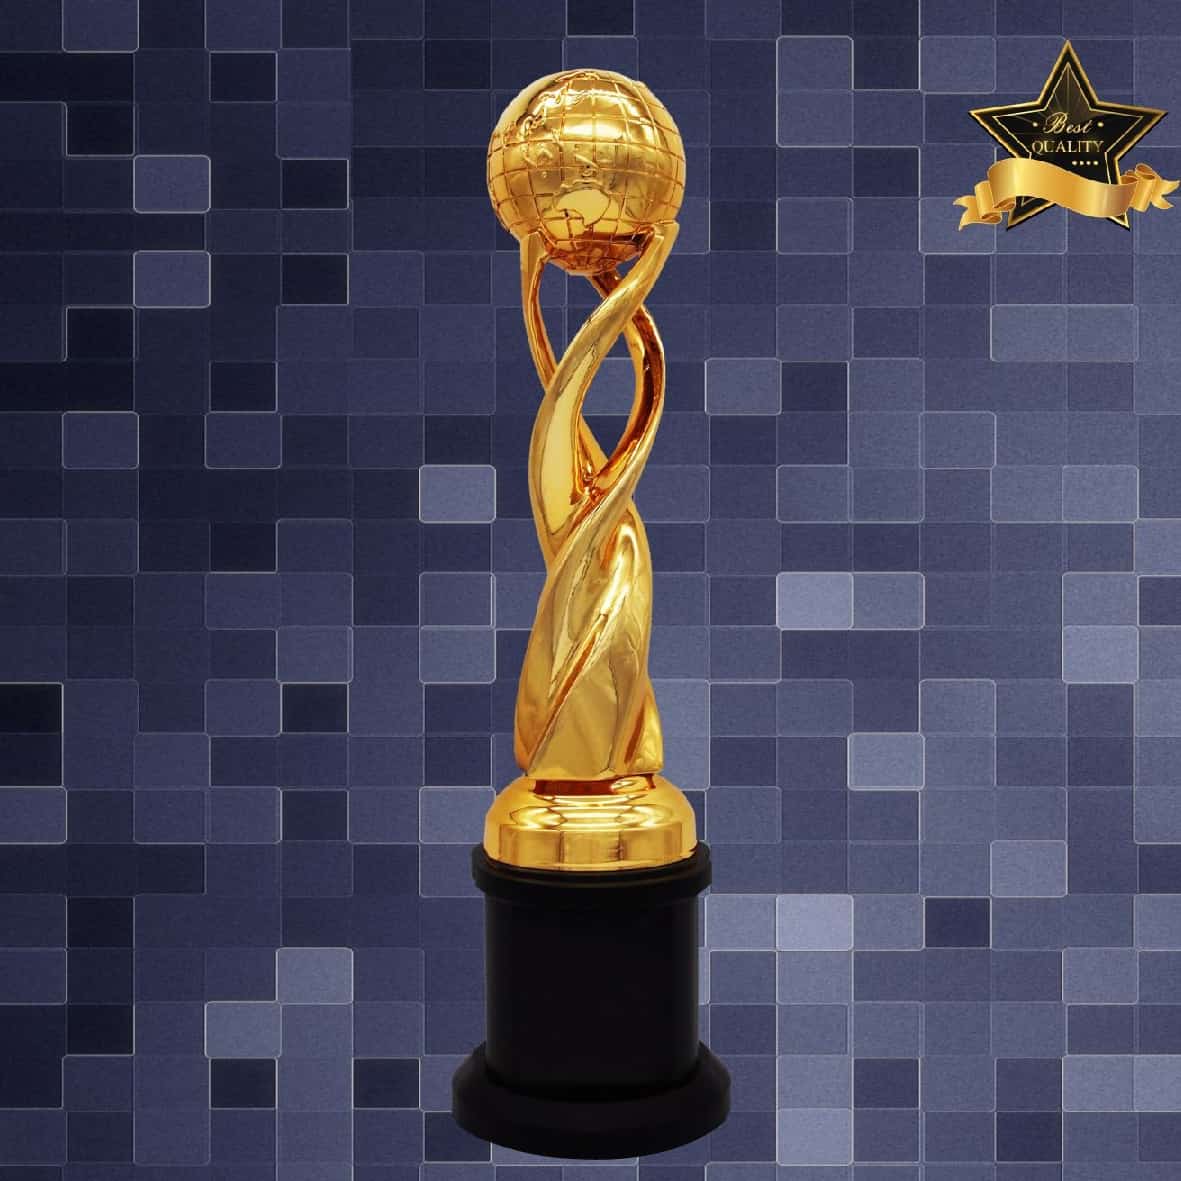 World Globe Trophy at Clazz Trophy Malaysia | #1 Rated Trophy Supplier in Malaysia